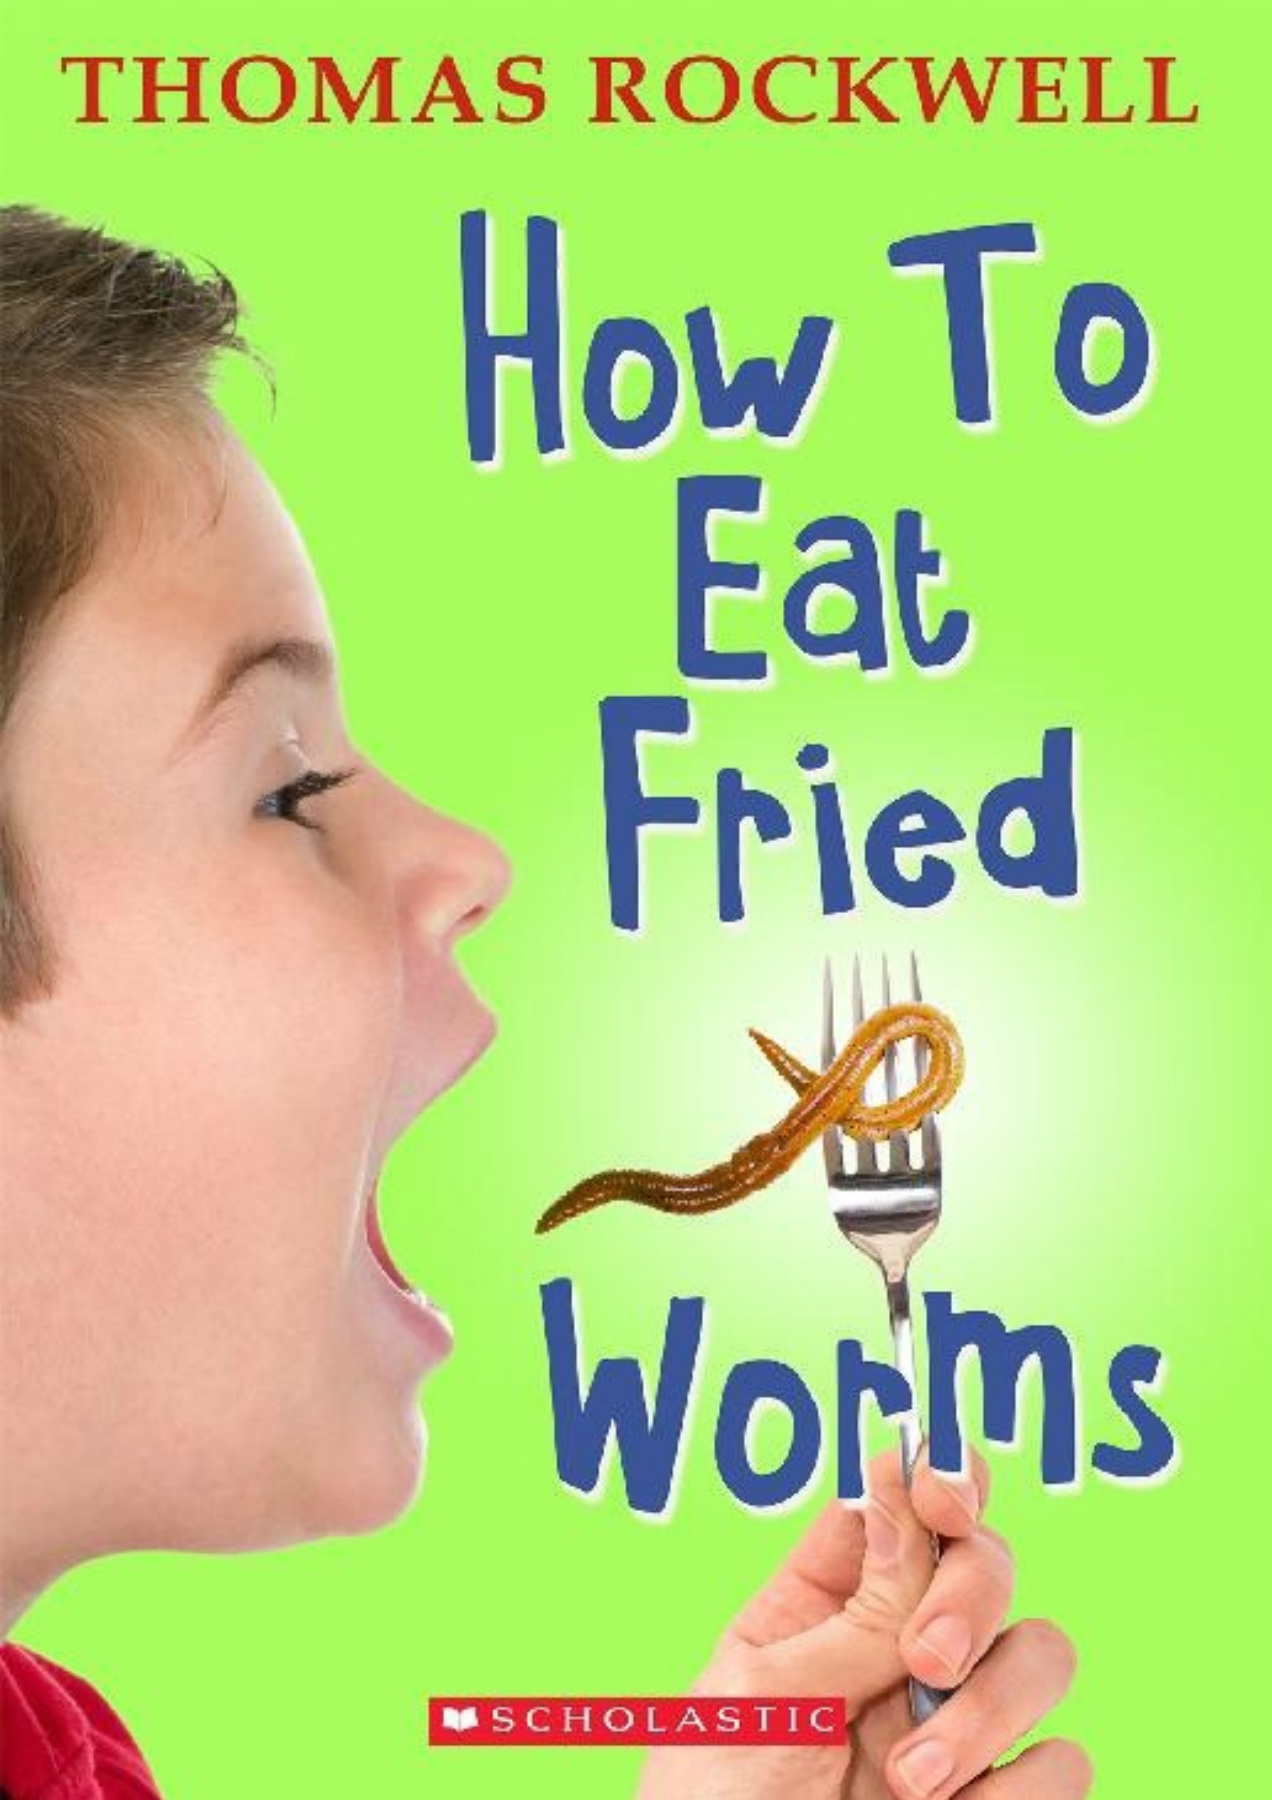 How To Eat Fried Worms Pdf